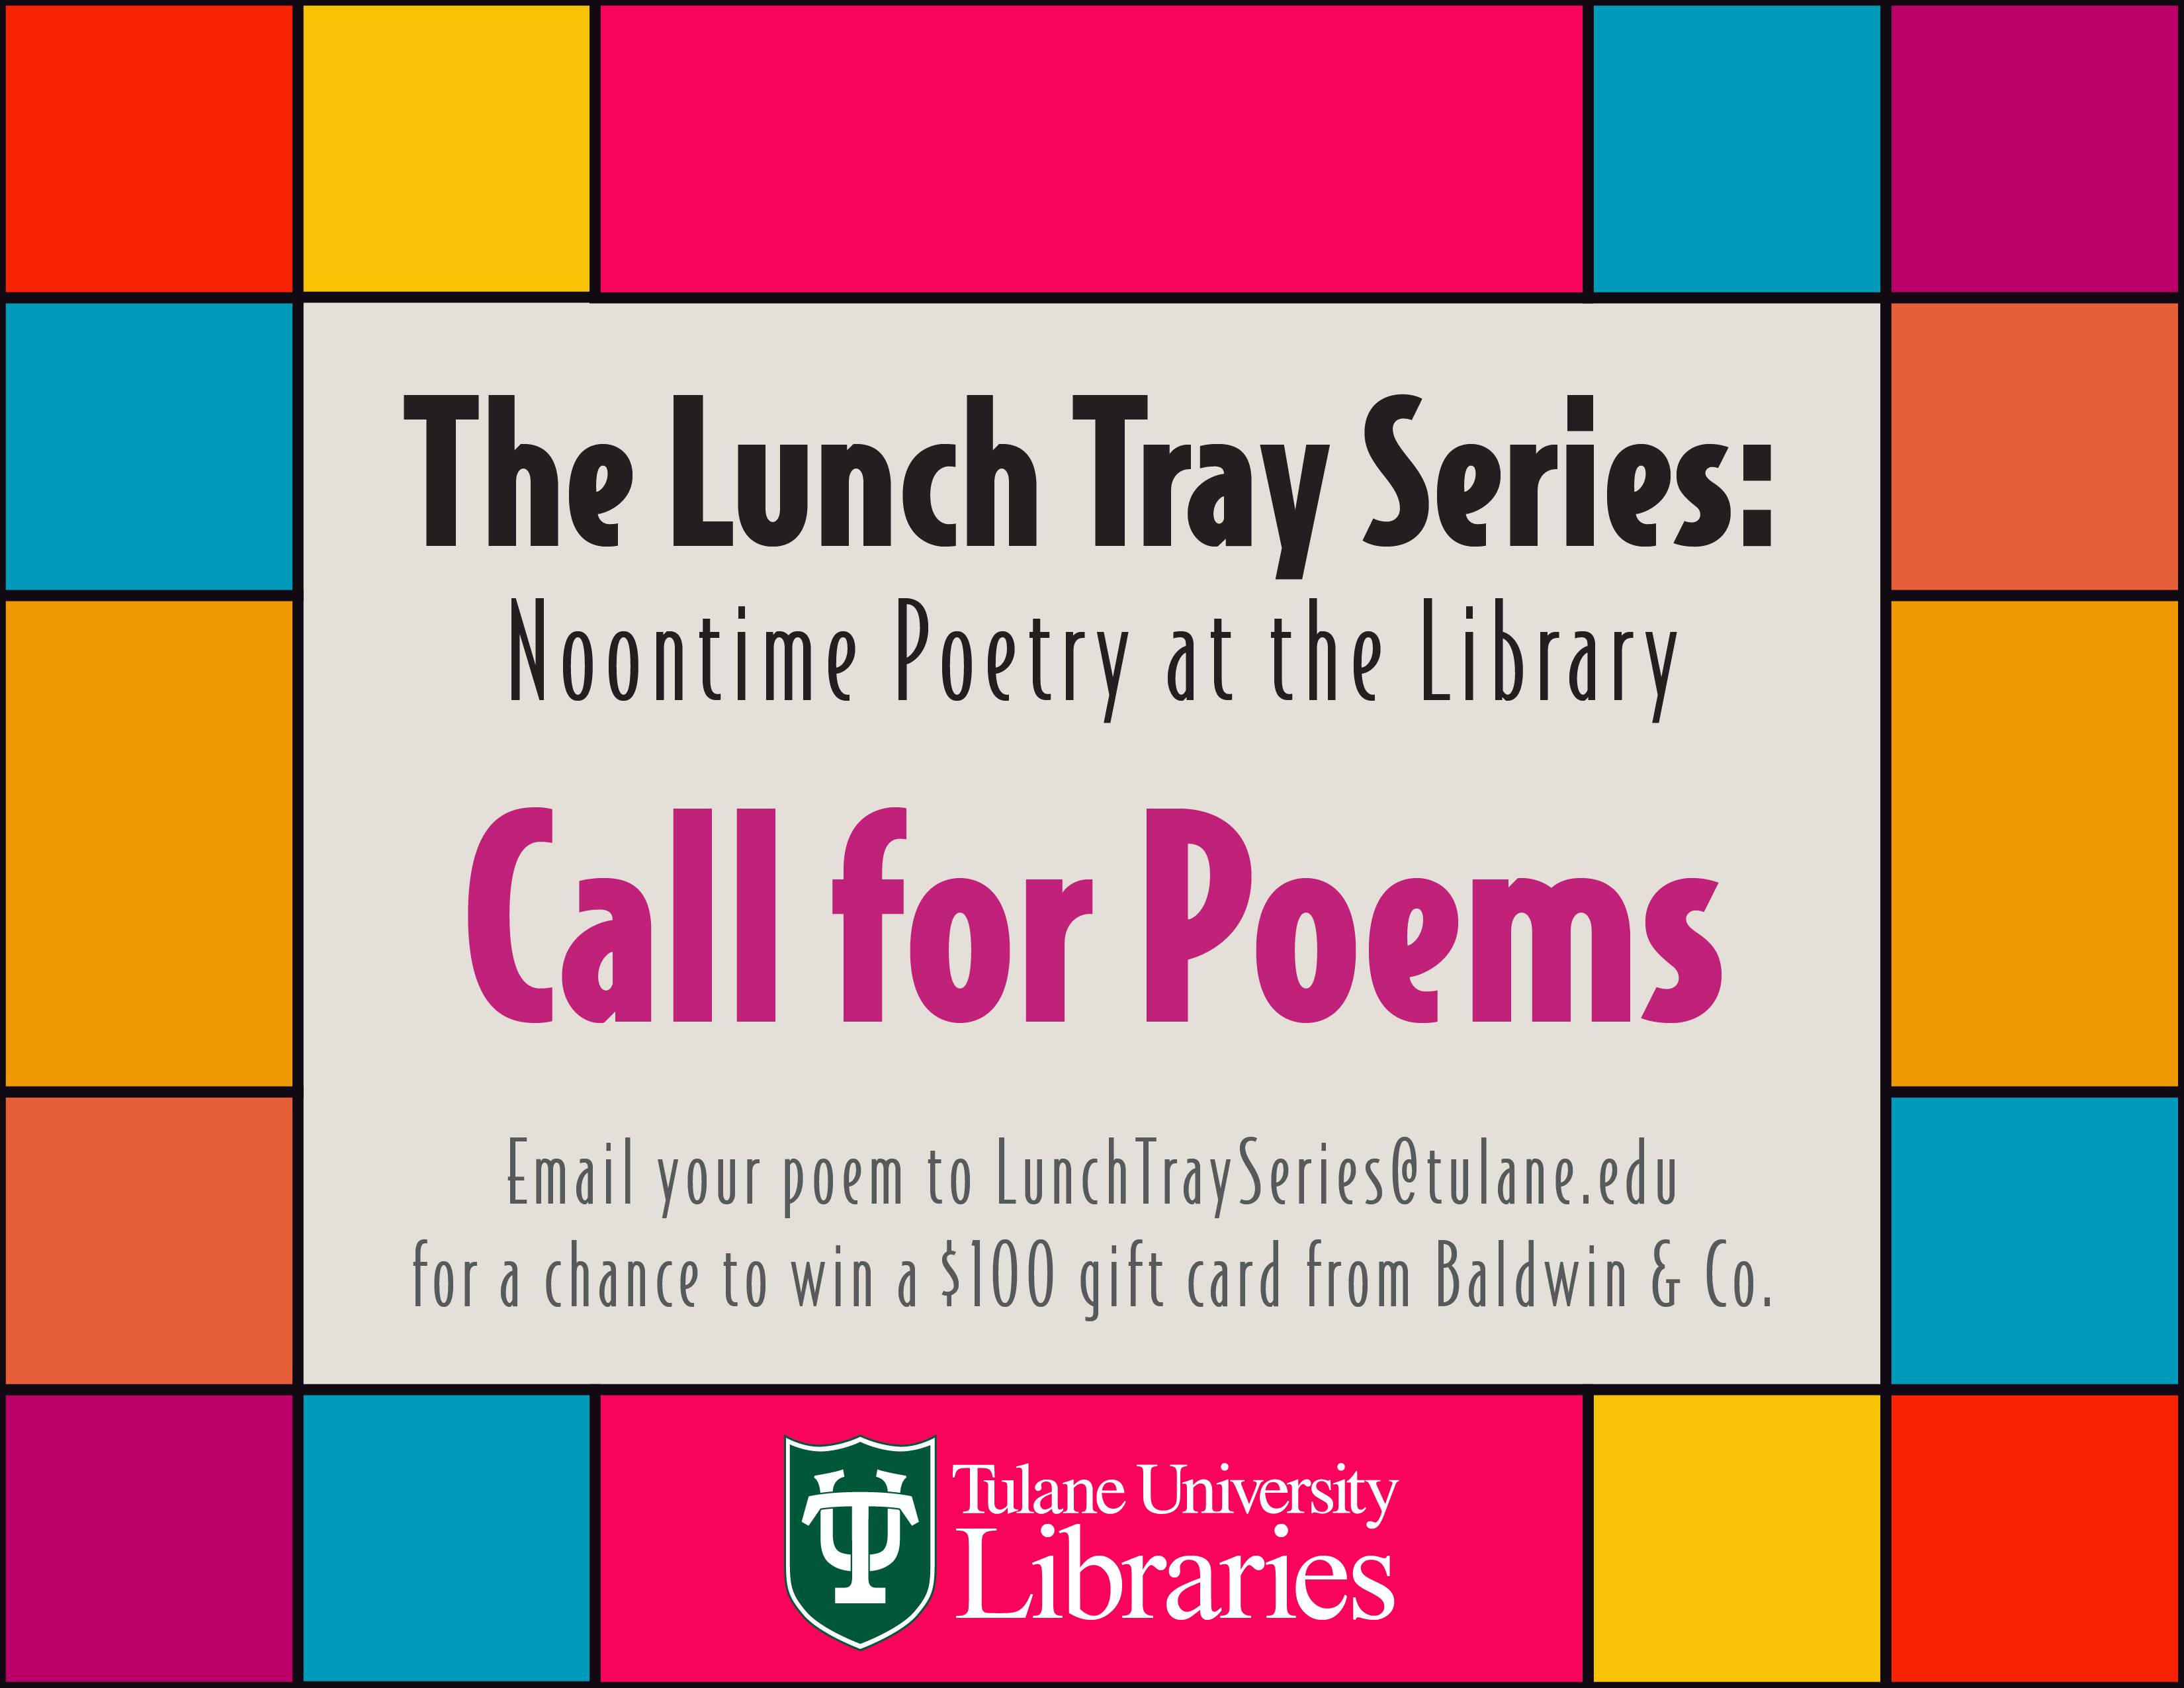 The Lunch Tray Series: Noontime Poetry at the Library Call for Poems, email your poem to lunchtrayseries@tulane.edu for a chance to win a $100 gift card from Baldwin & Co.